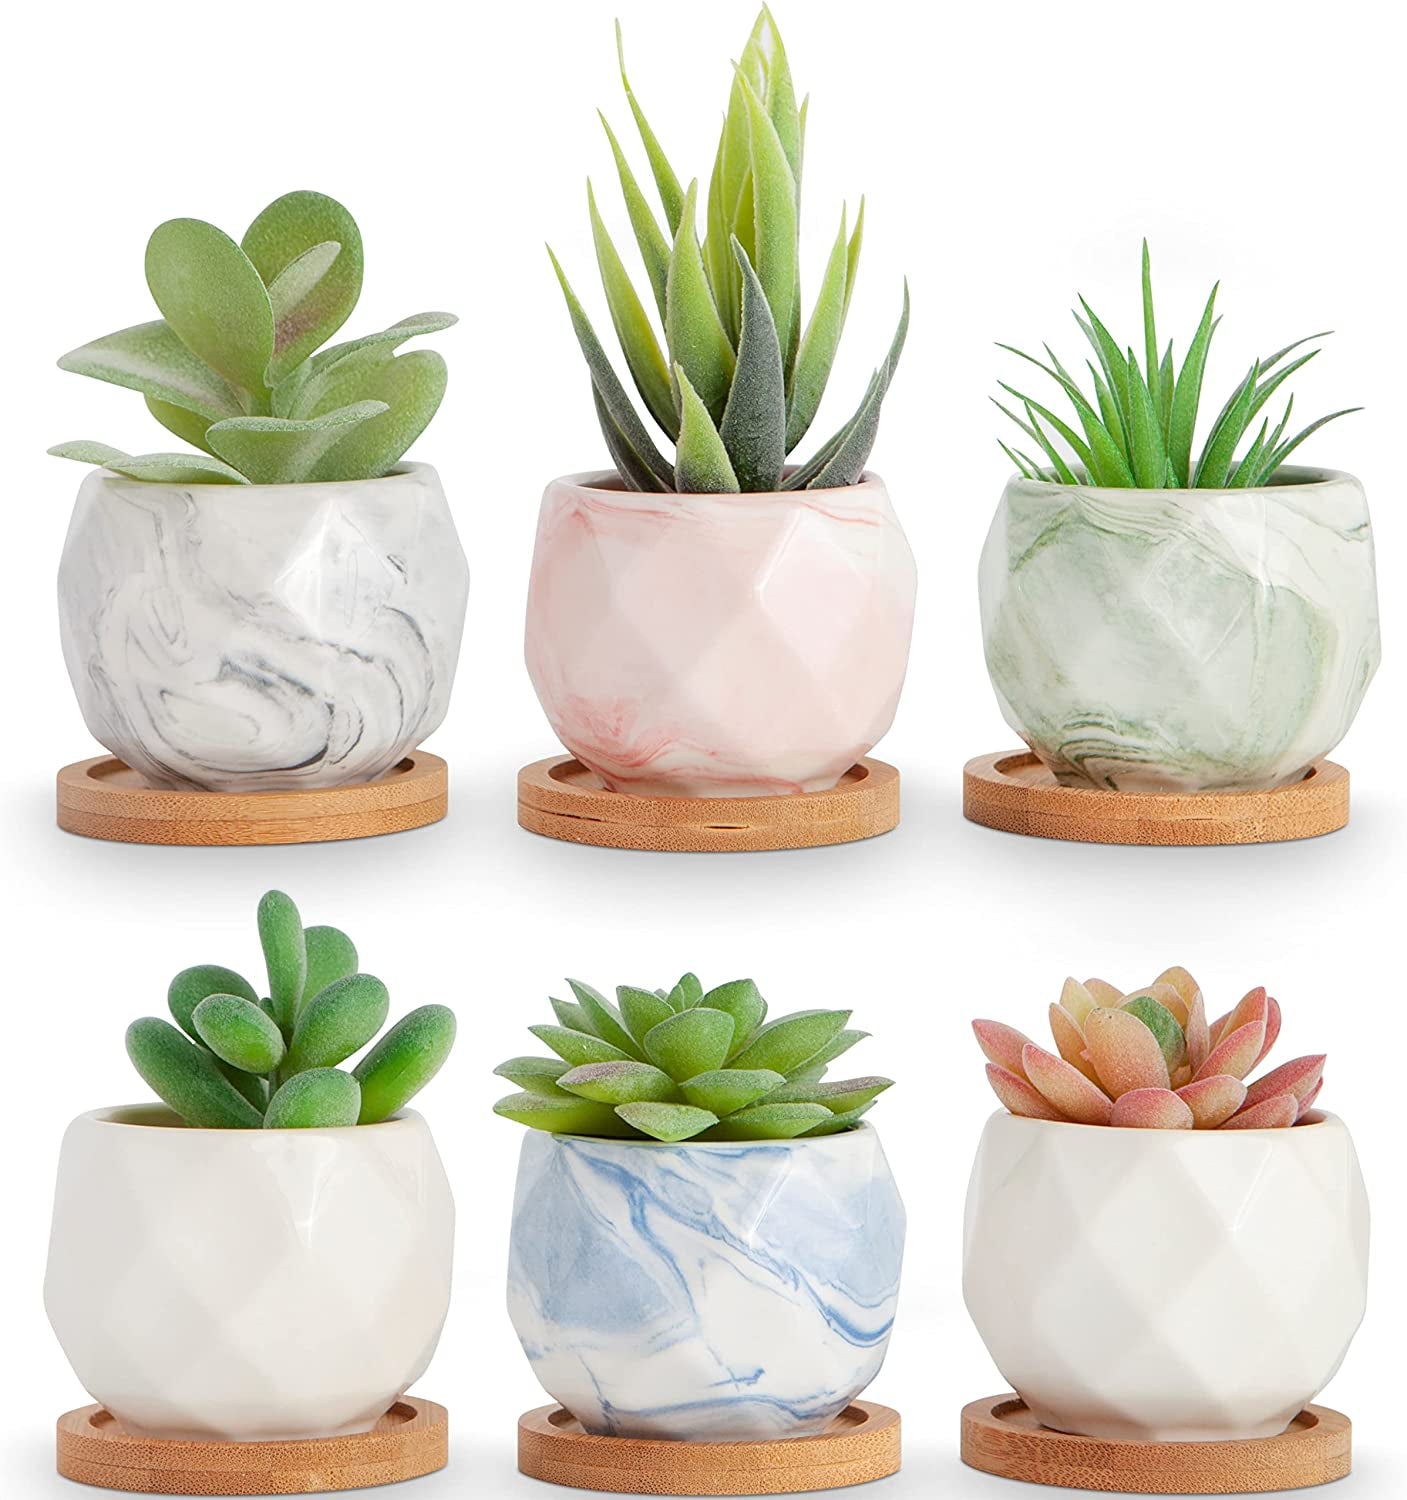 ilohaus, Small Succulent Pots, Small Planters for Indoor Plants, Cute Plant Pots Set of 6 with Plant Saucer, Ceramic Planter with Bamboo Saucers, Mini Pots for Plants, Home Decor Cactus Pot